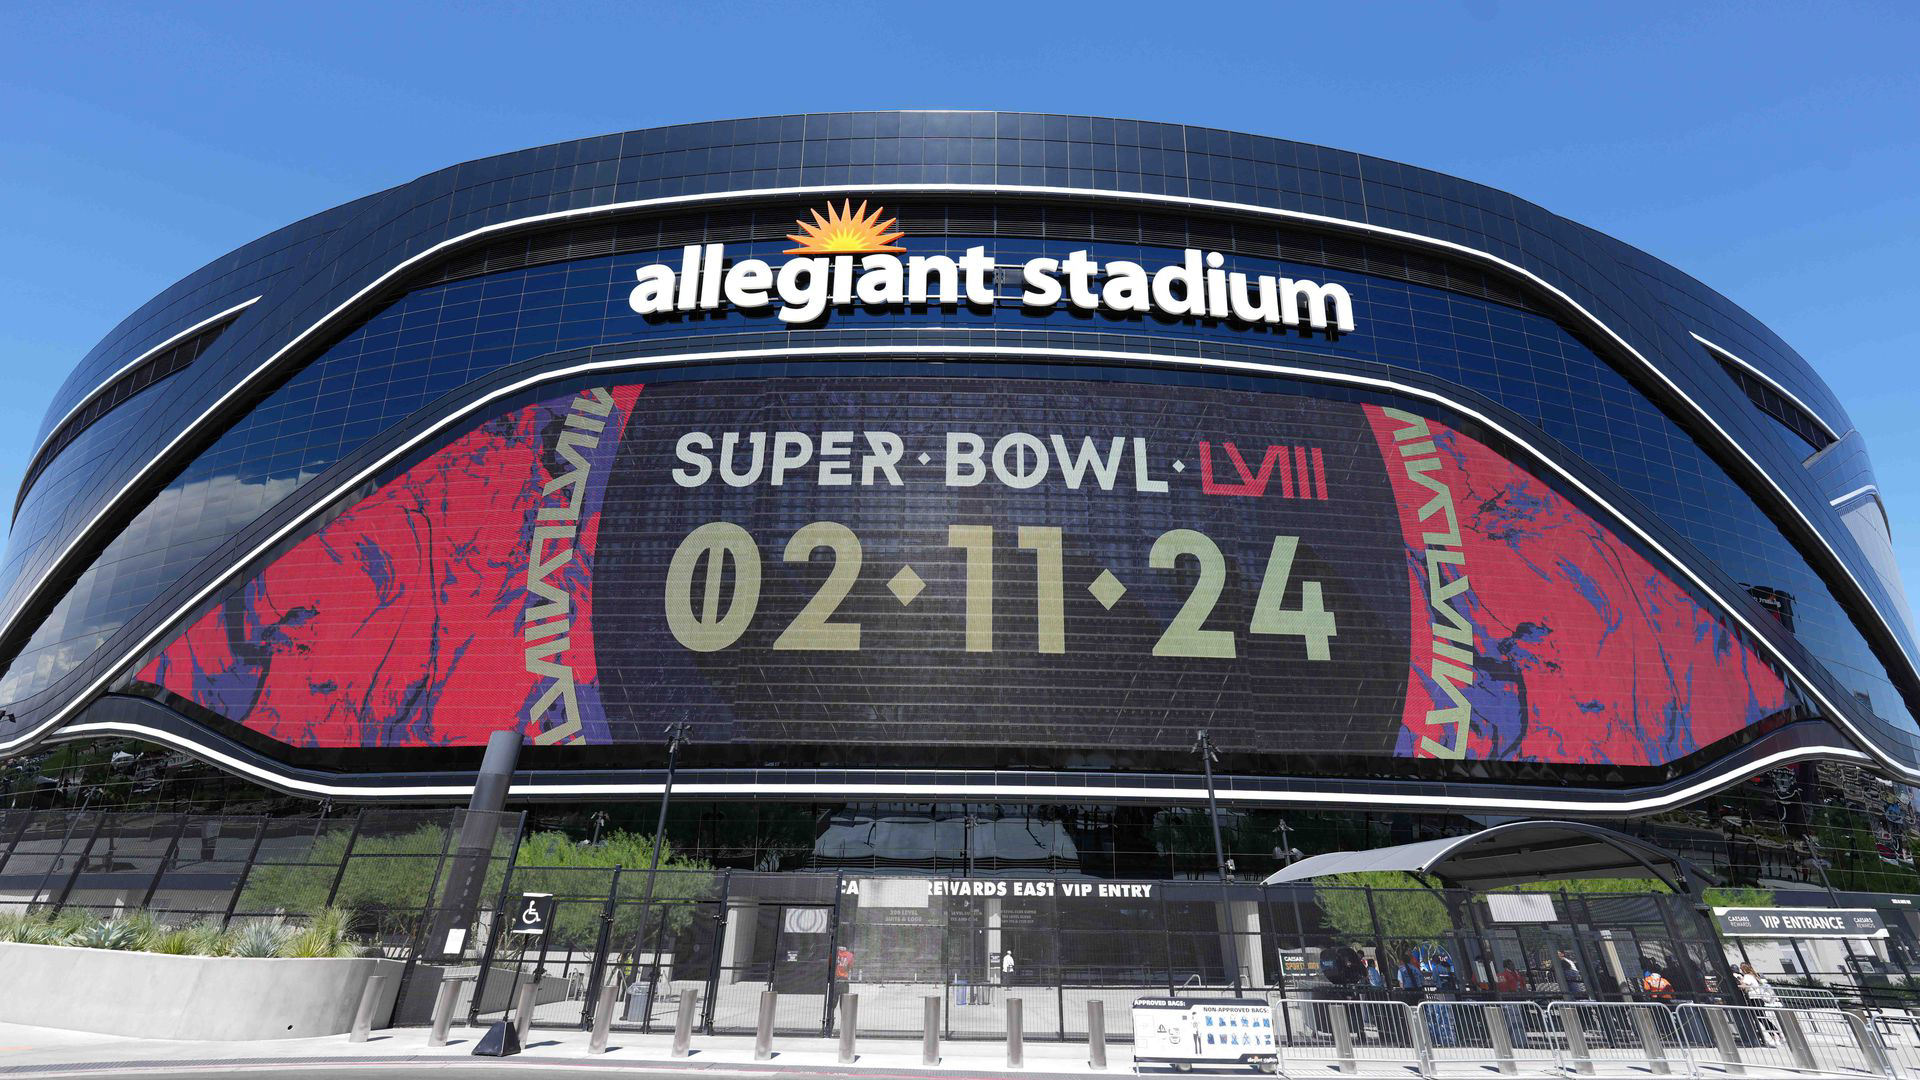 A comprehensive guide to Super Bowl game day at Allegiant Stadium in